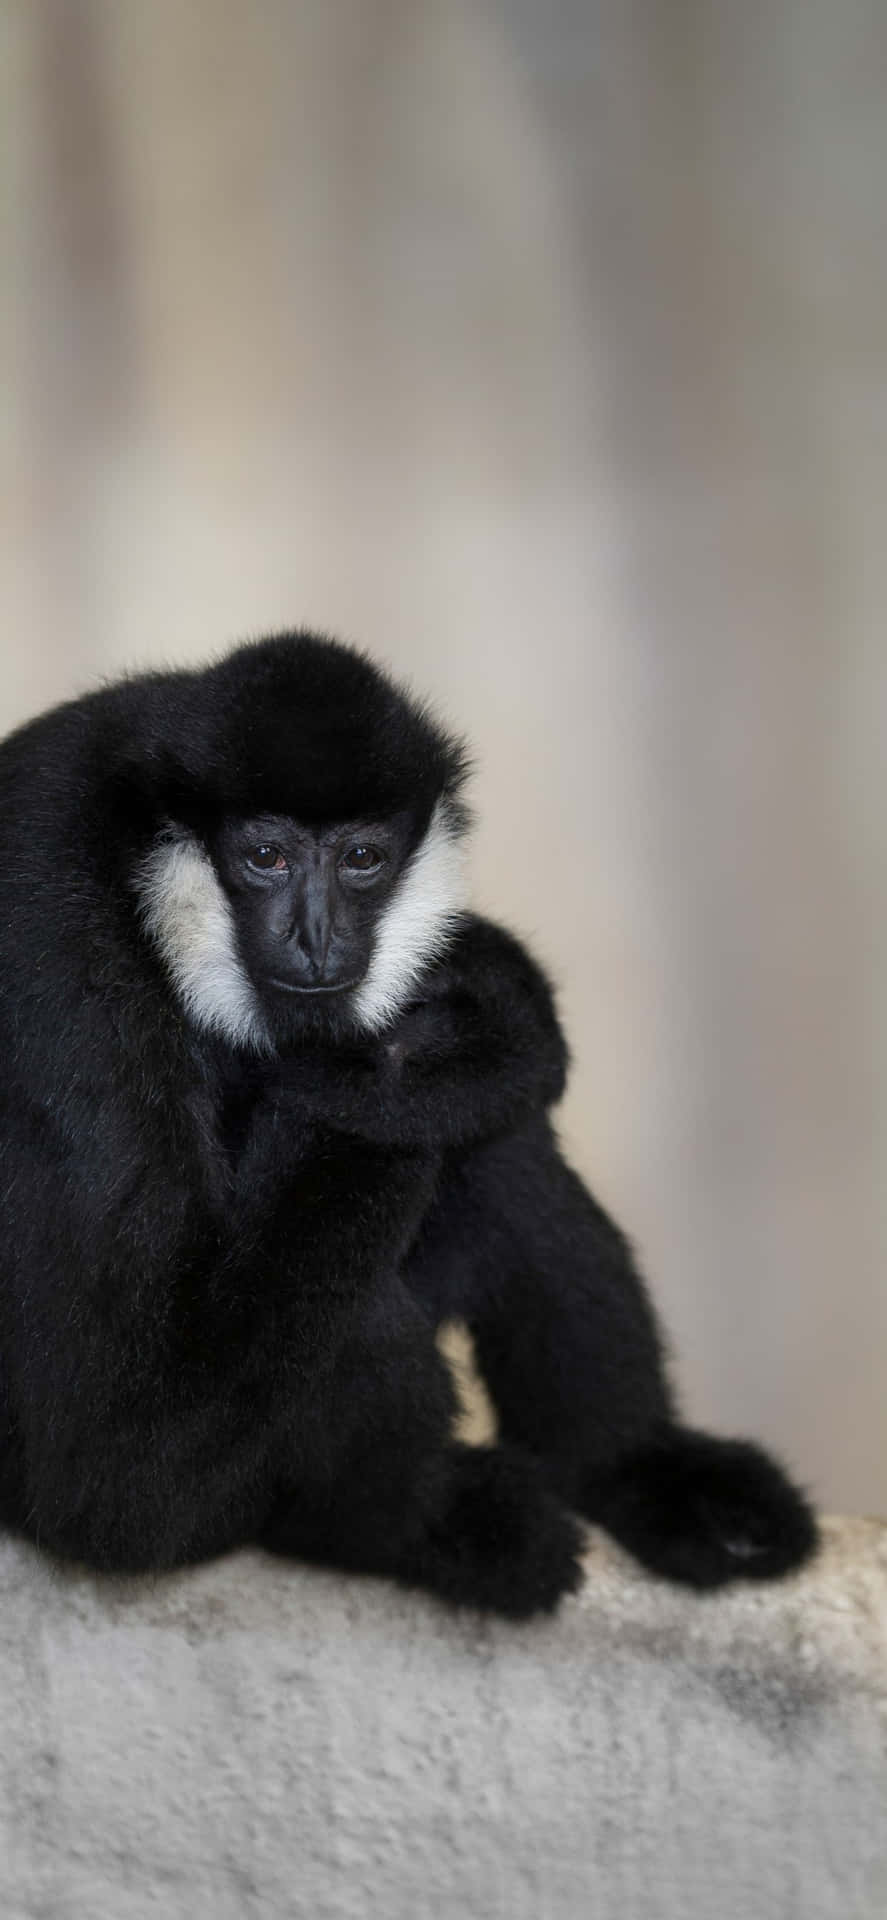 A Black And White Monkey Sitting On A Wall